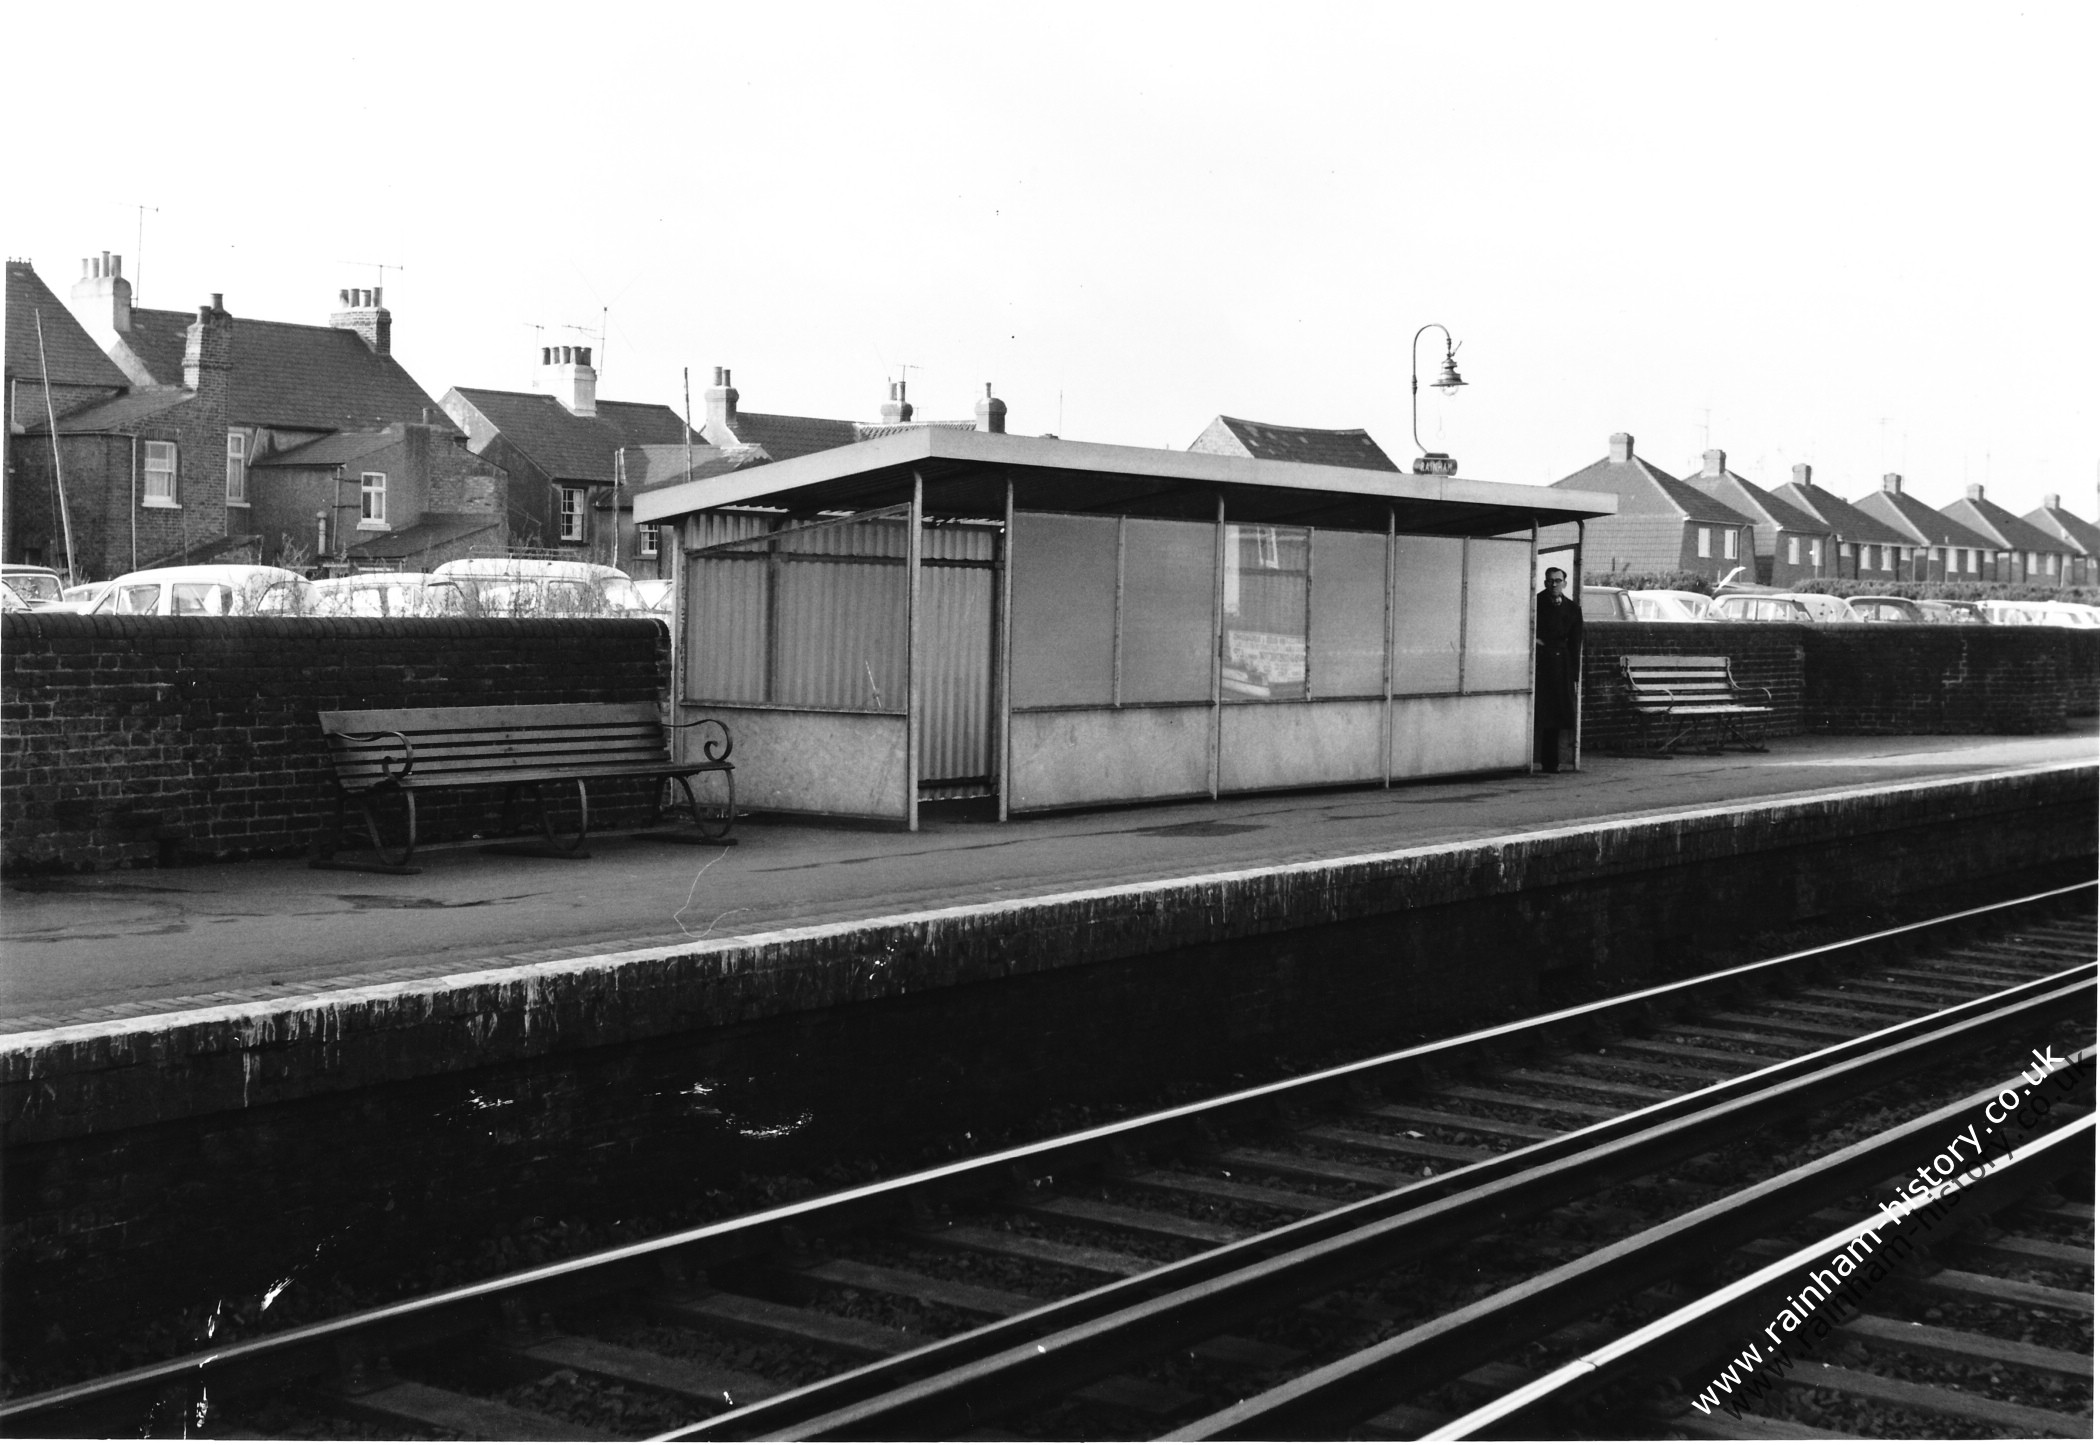  London bound platform with a solitary passenger waiting in the somewhat shabby looking shelter on the platform. You can see the new looking houses on Tufton Road in the distance